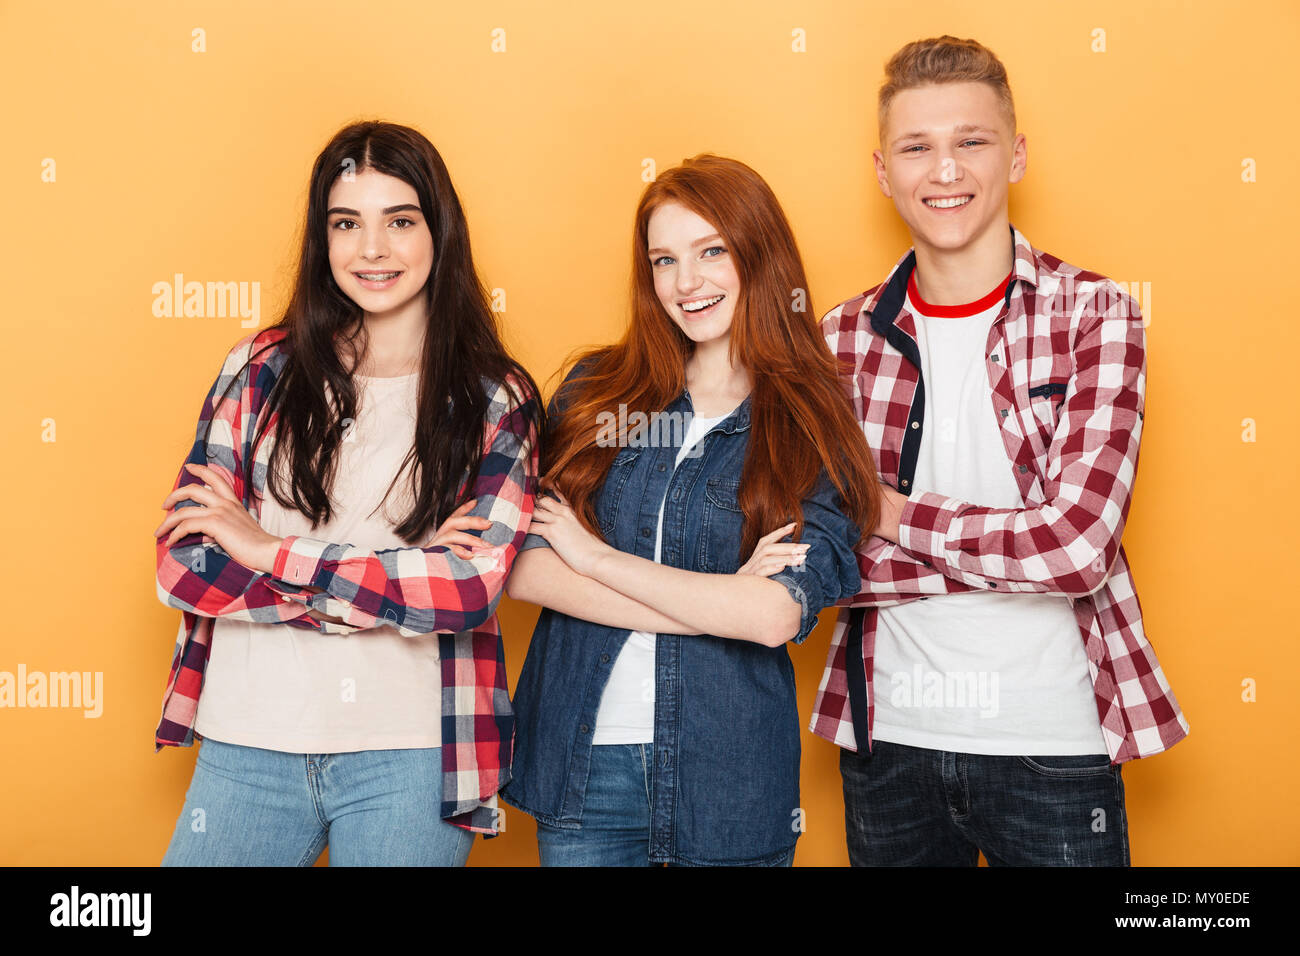 Group of happy school friends standing together with arms folded over yellow background Stock Photo